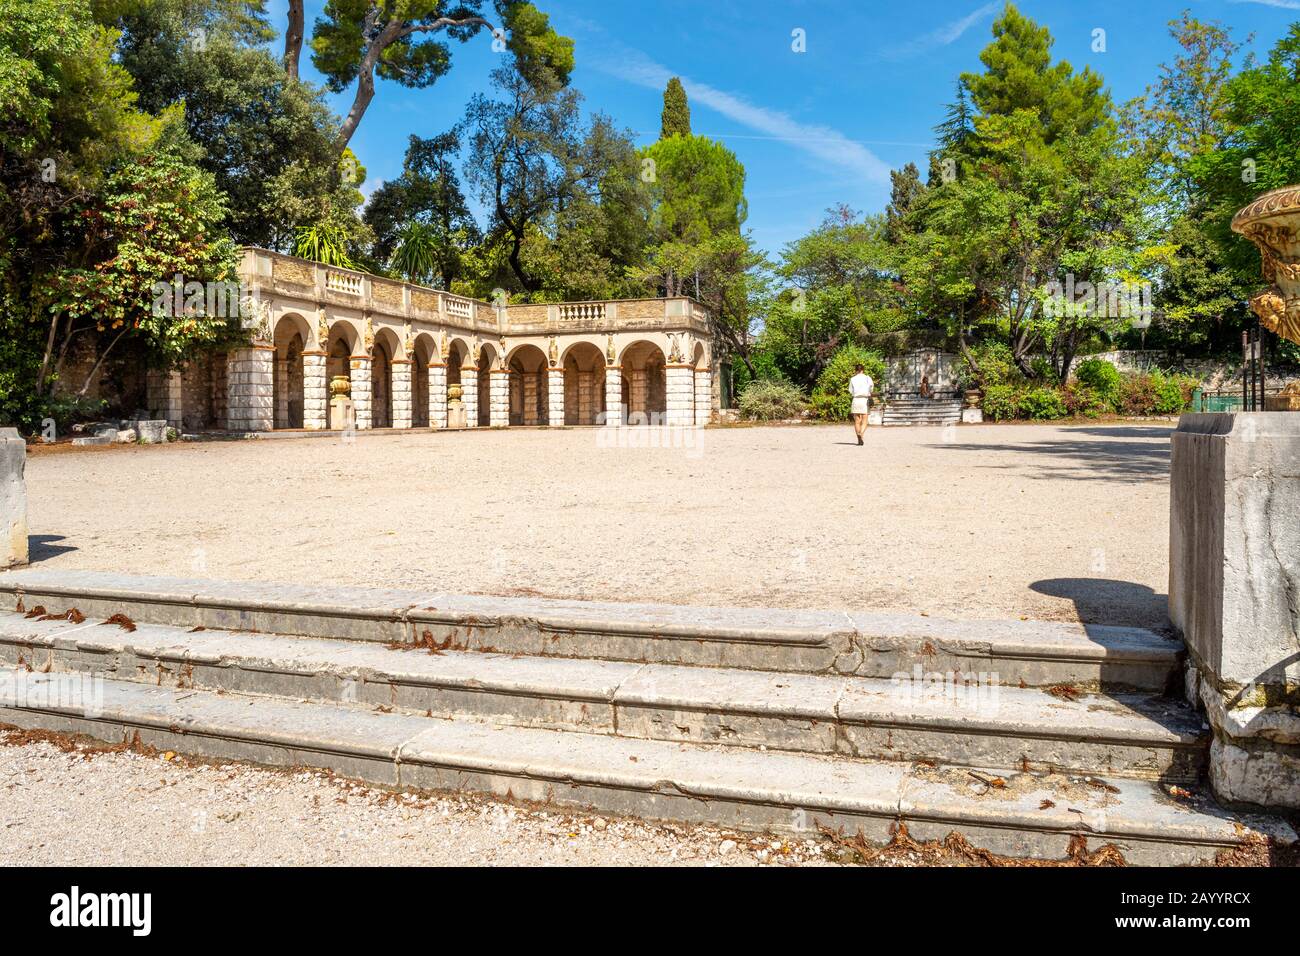 A solo female traveler walks through a gravel courtyard near an arched Roman building on Castle Hill in Nice, France. Stock Photo